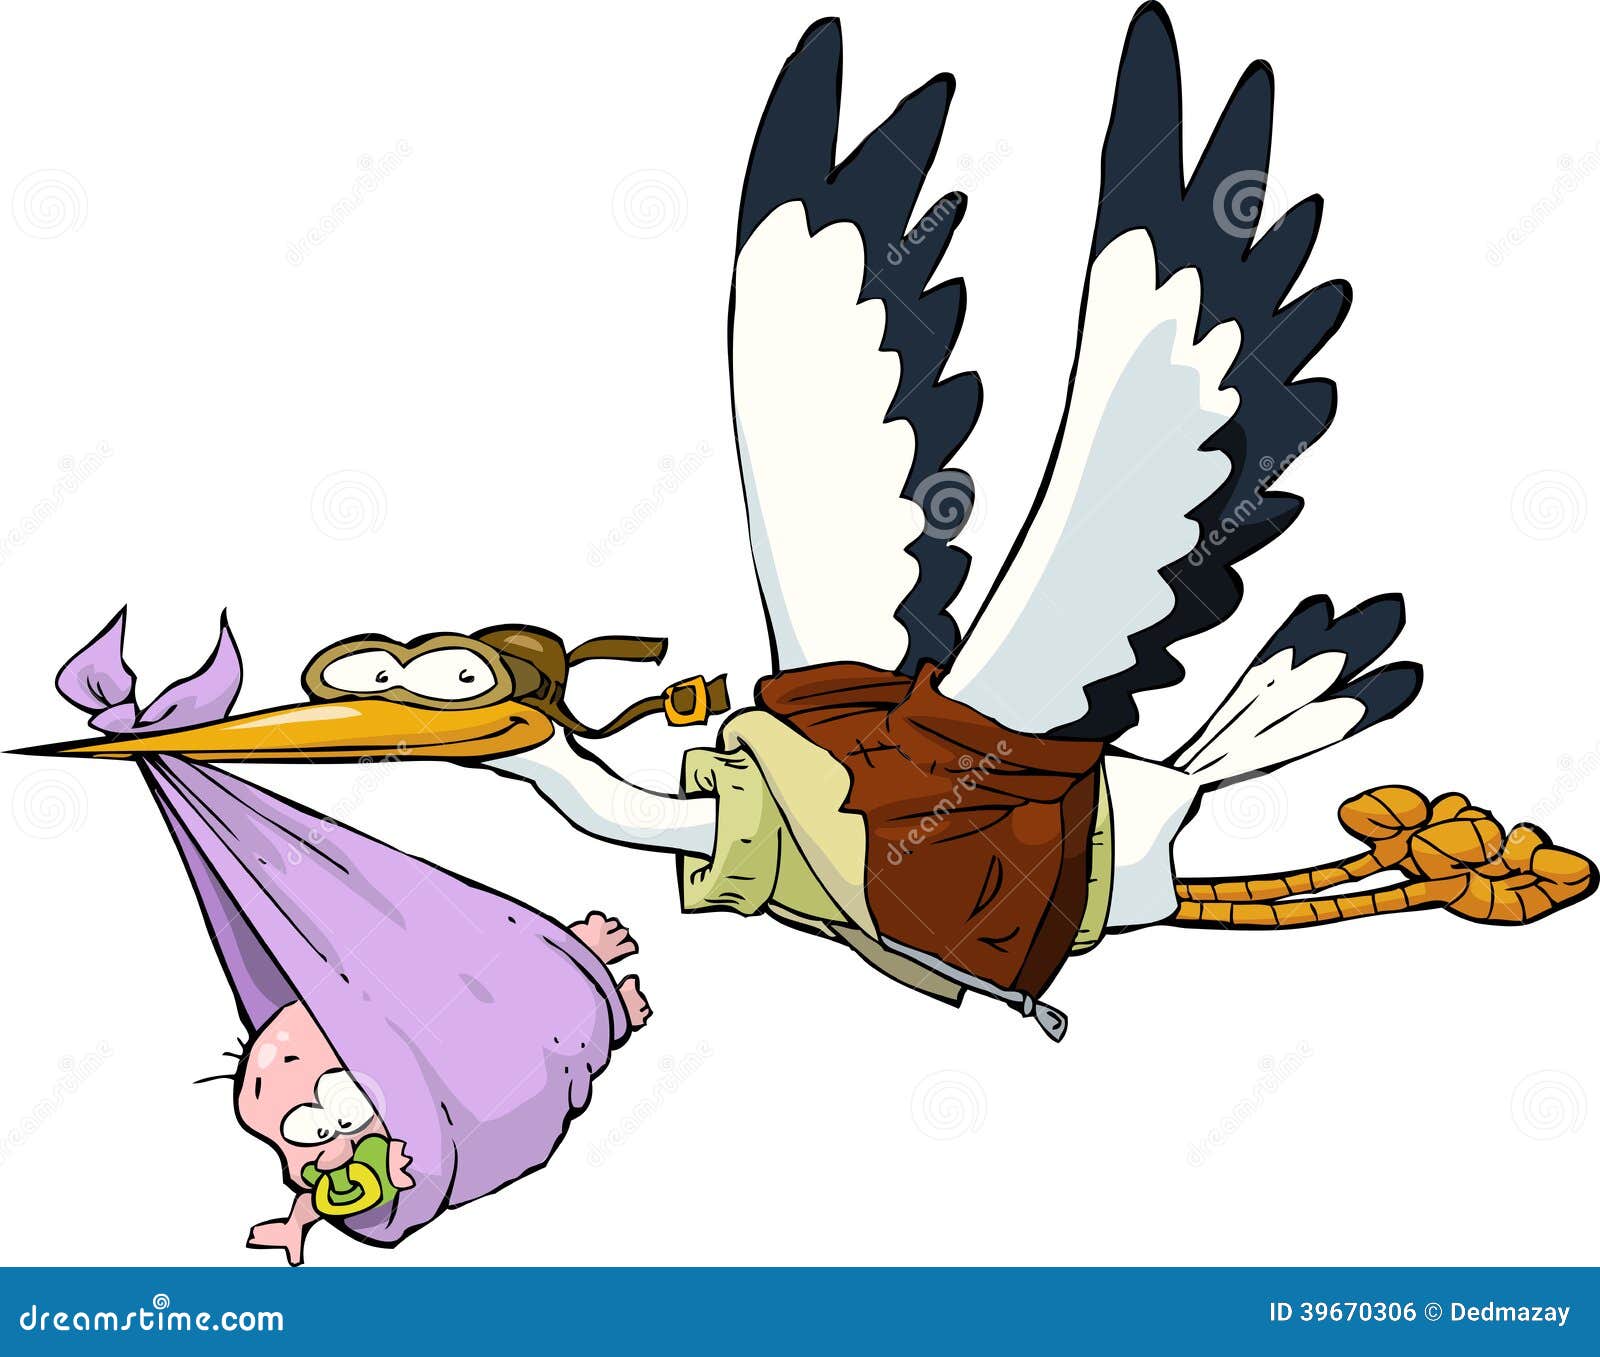 clipart baby storch - photo #33